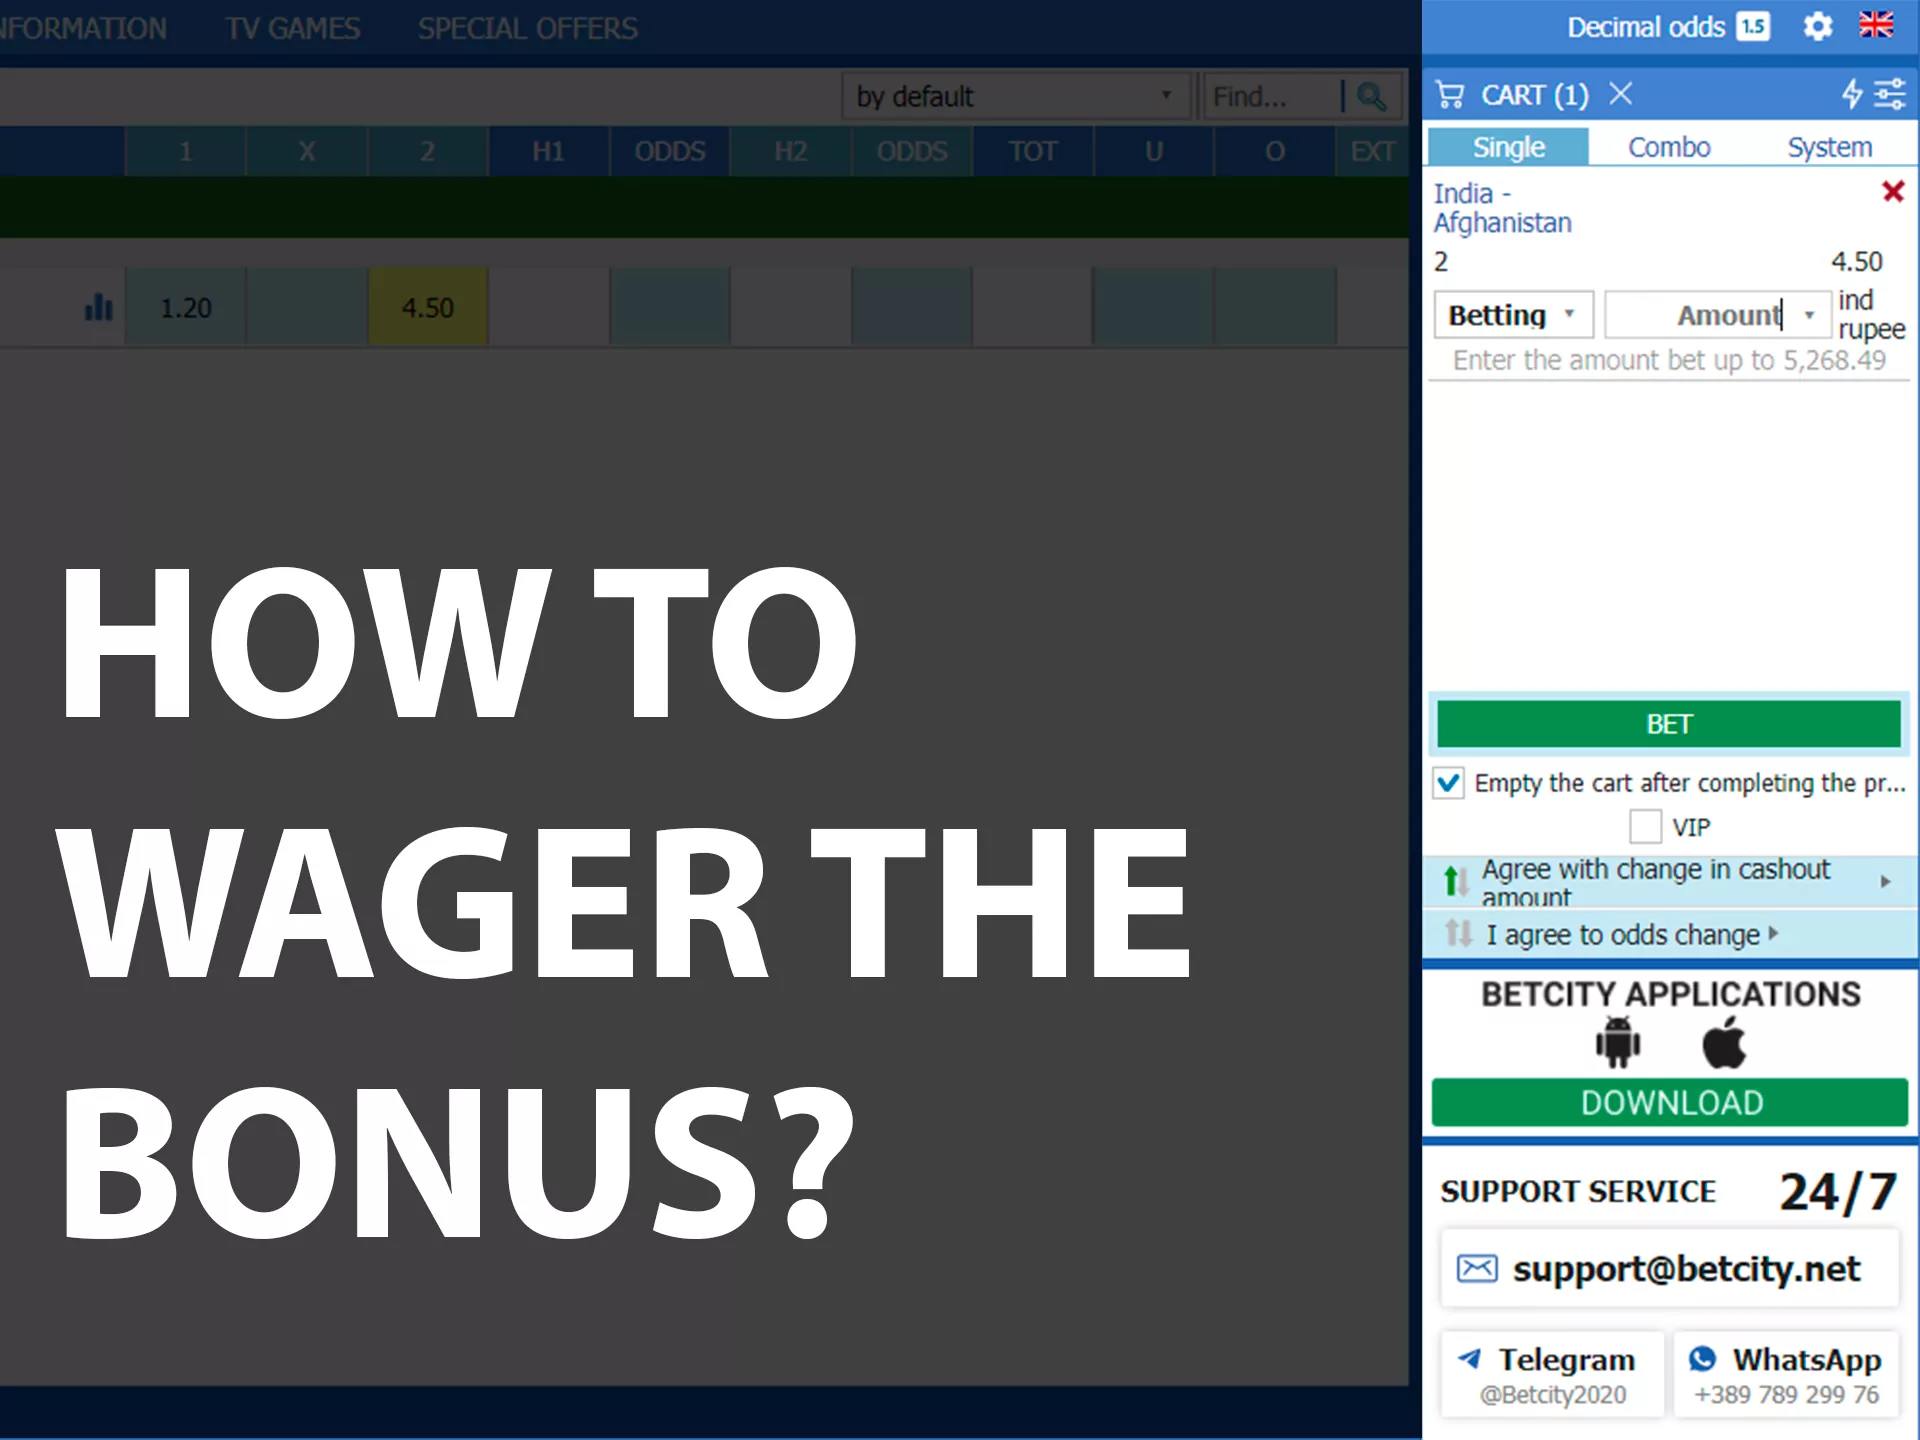 Wager your bonus money to withdraw it.